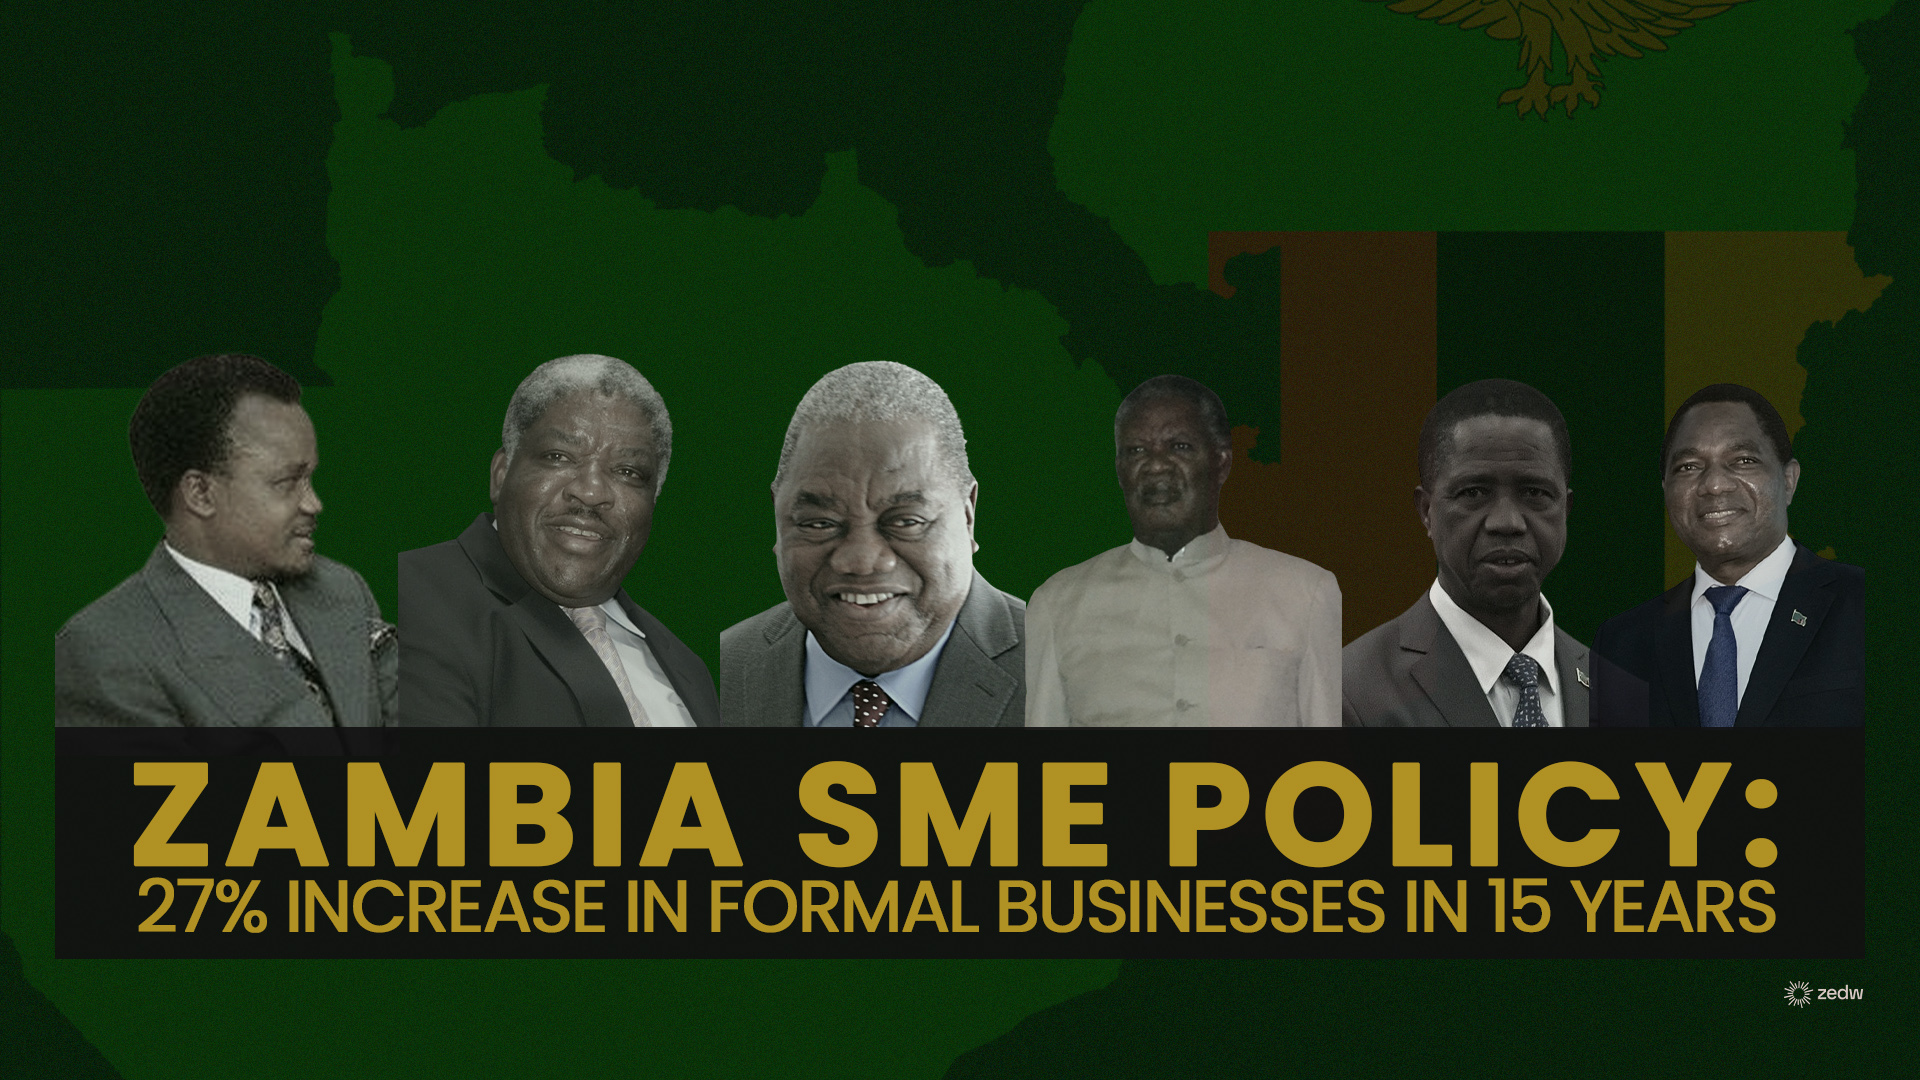 Zambia SME Policy Revolution: A model to regulate Africa’s informal sector?